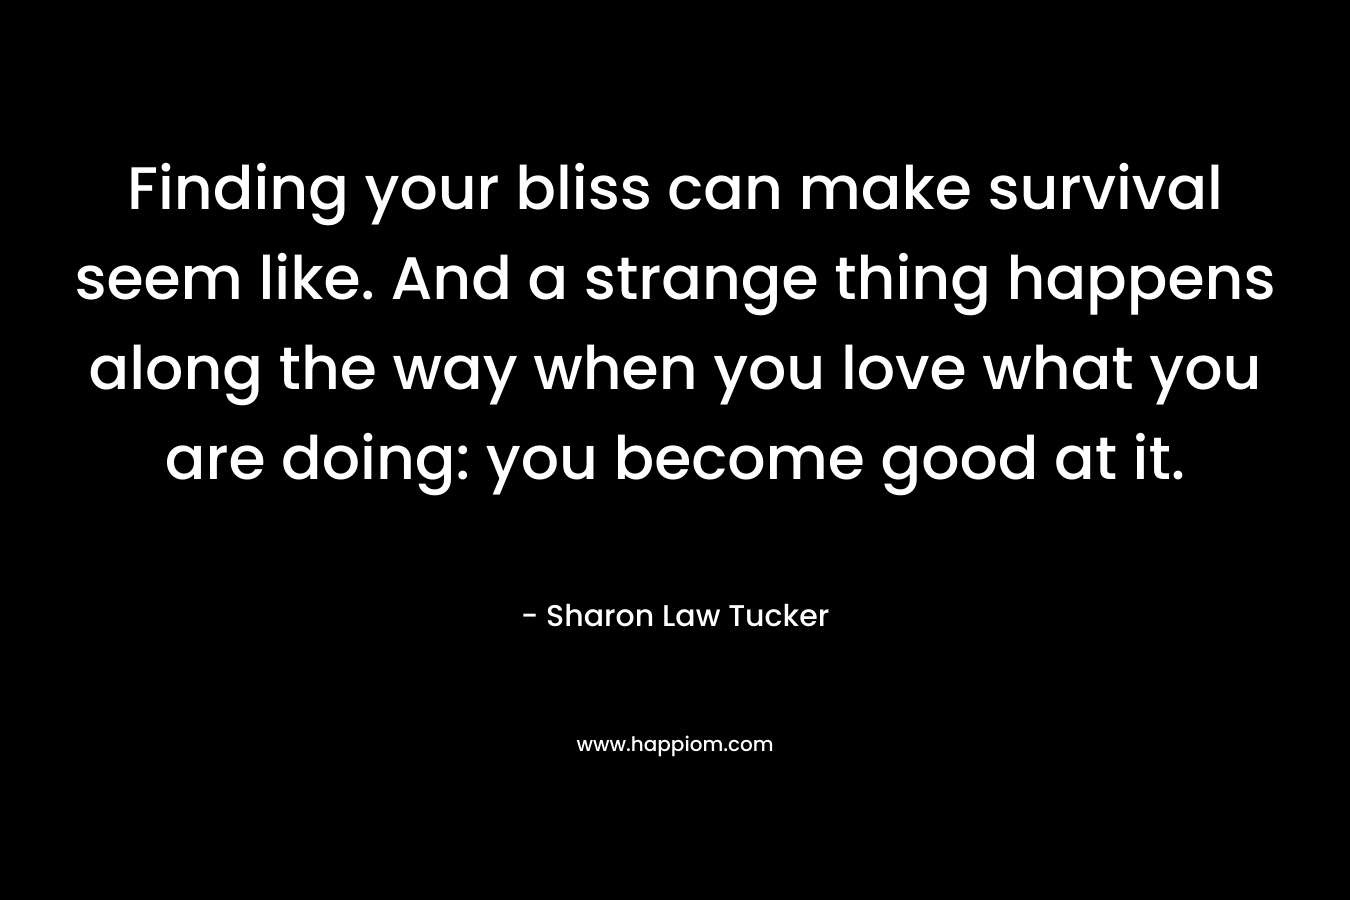 Finding your bliss can make survival seem like. And a strange thing happens along the way when you love what you are doing: you become good at it.